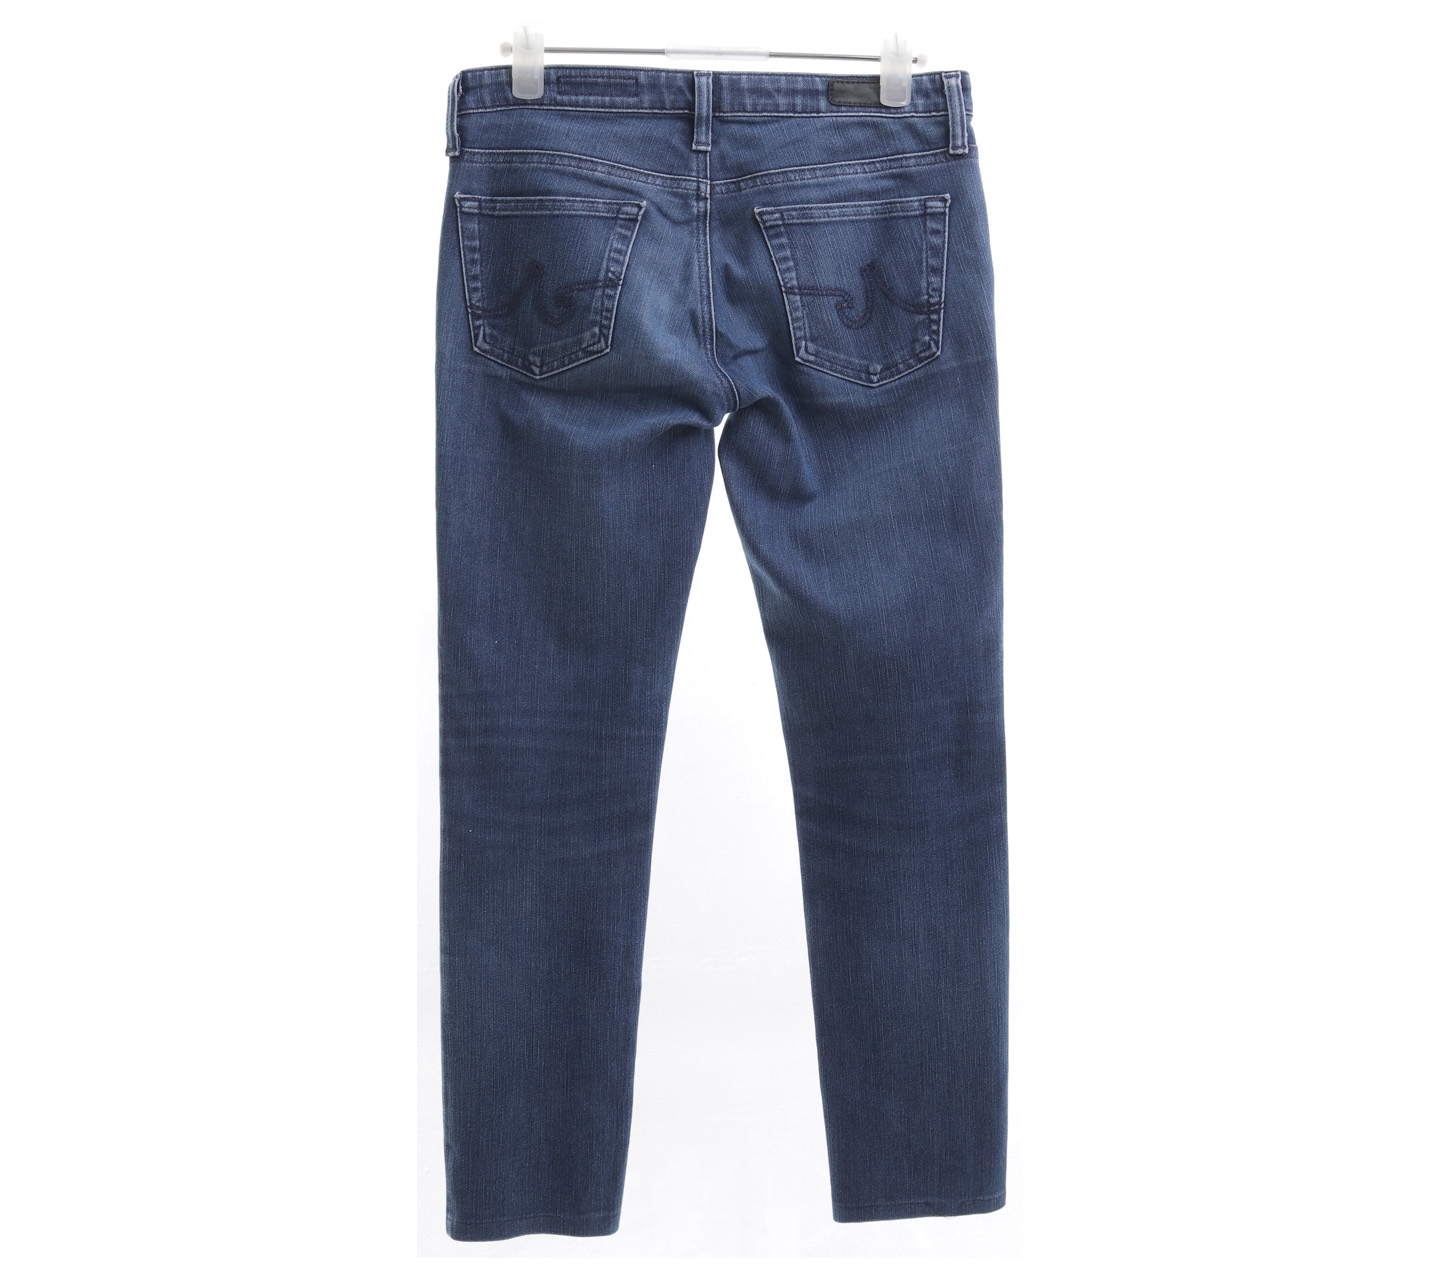 Adriano Goldschmied Blue Washed Denim Long Pants